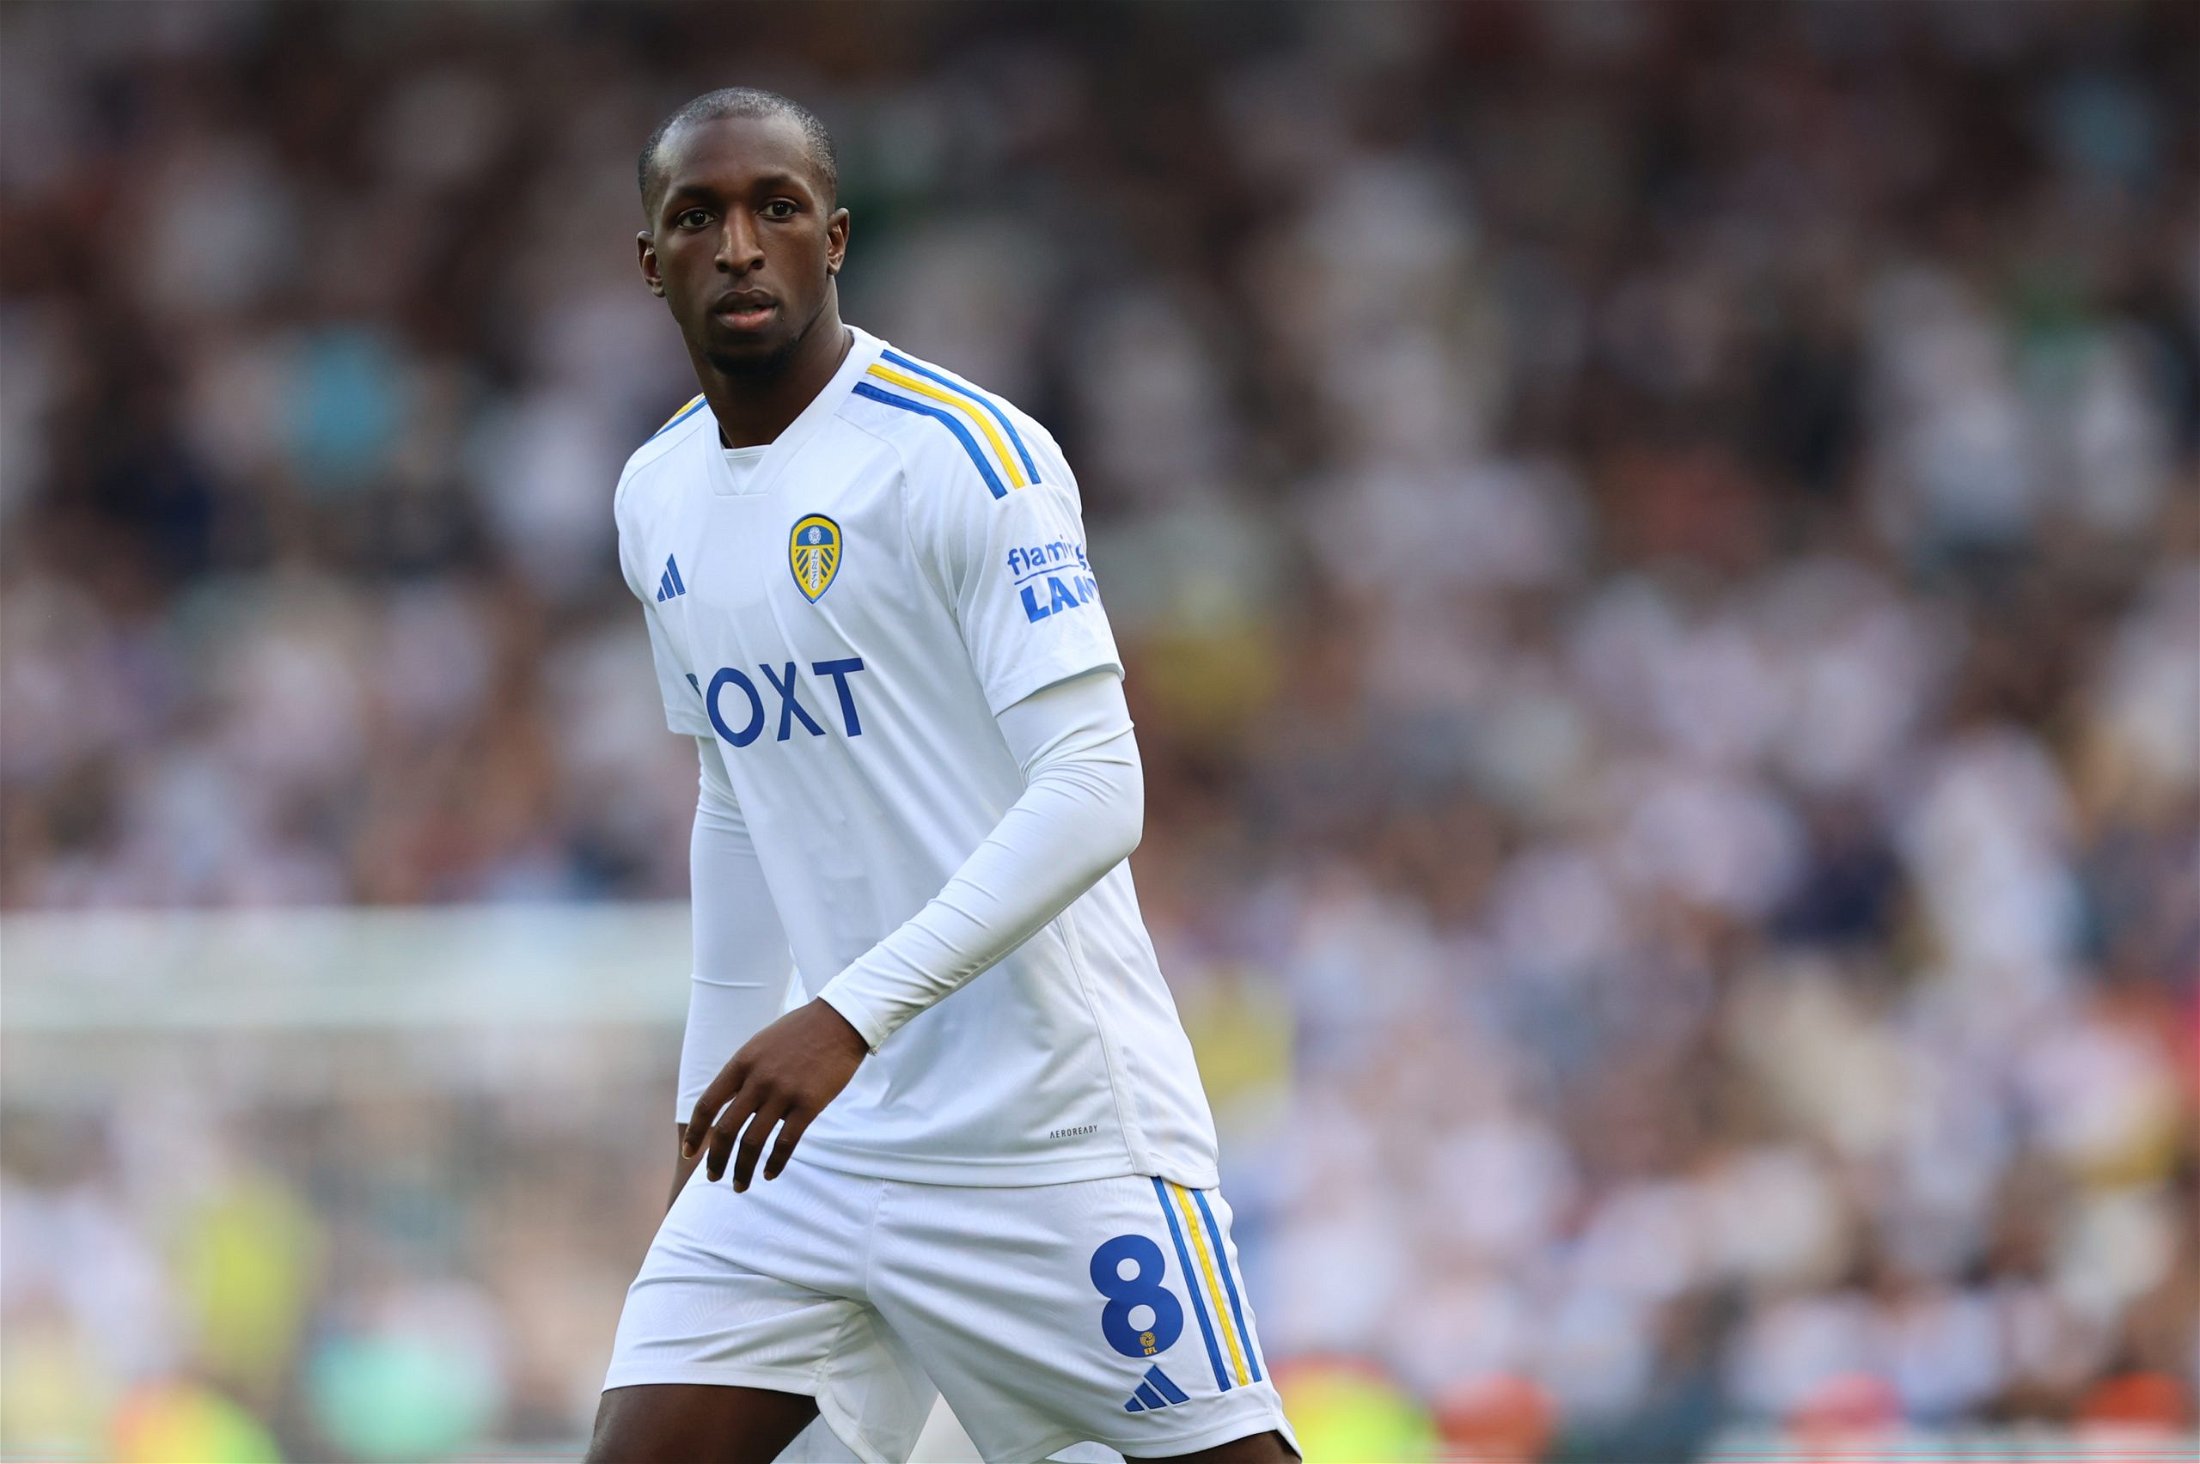 What a player': Georginio Rutter wowed by Leeds United midfielder